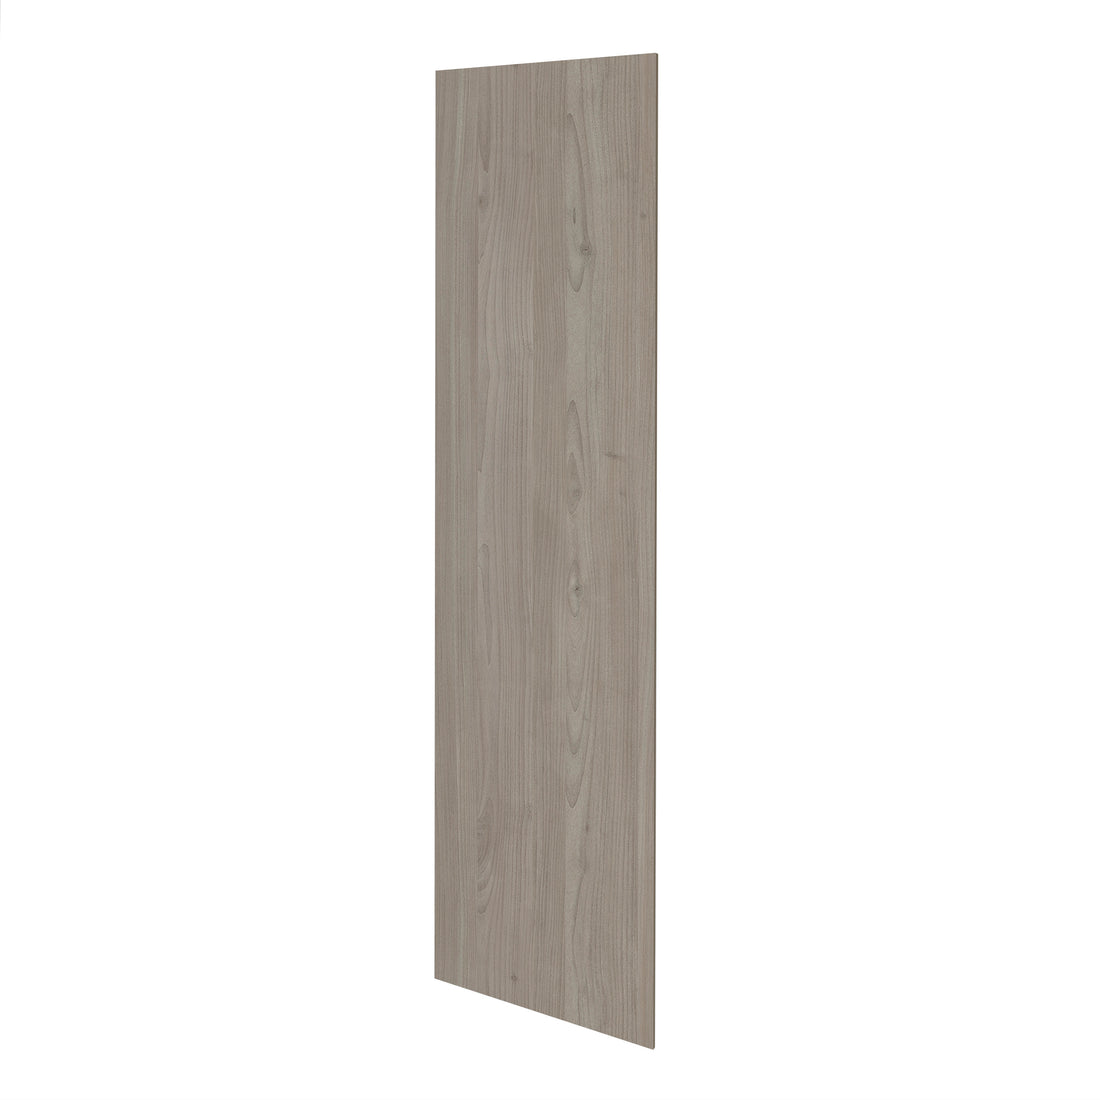 Grey Nordic Slab Style Pantry Kitchen Cabinet End Panel (24 in W x 0.75 in D x 90 in H) -  Pro-Edge HD